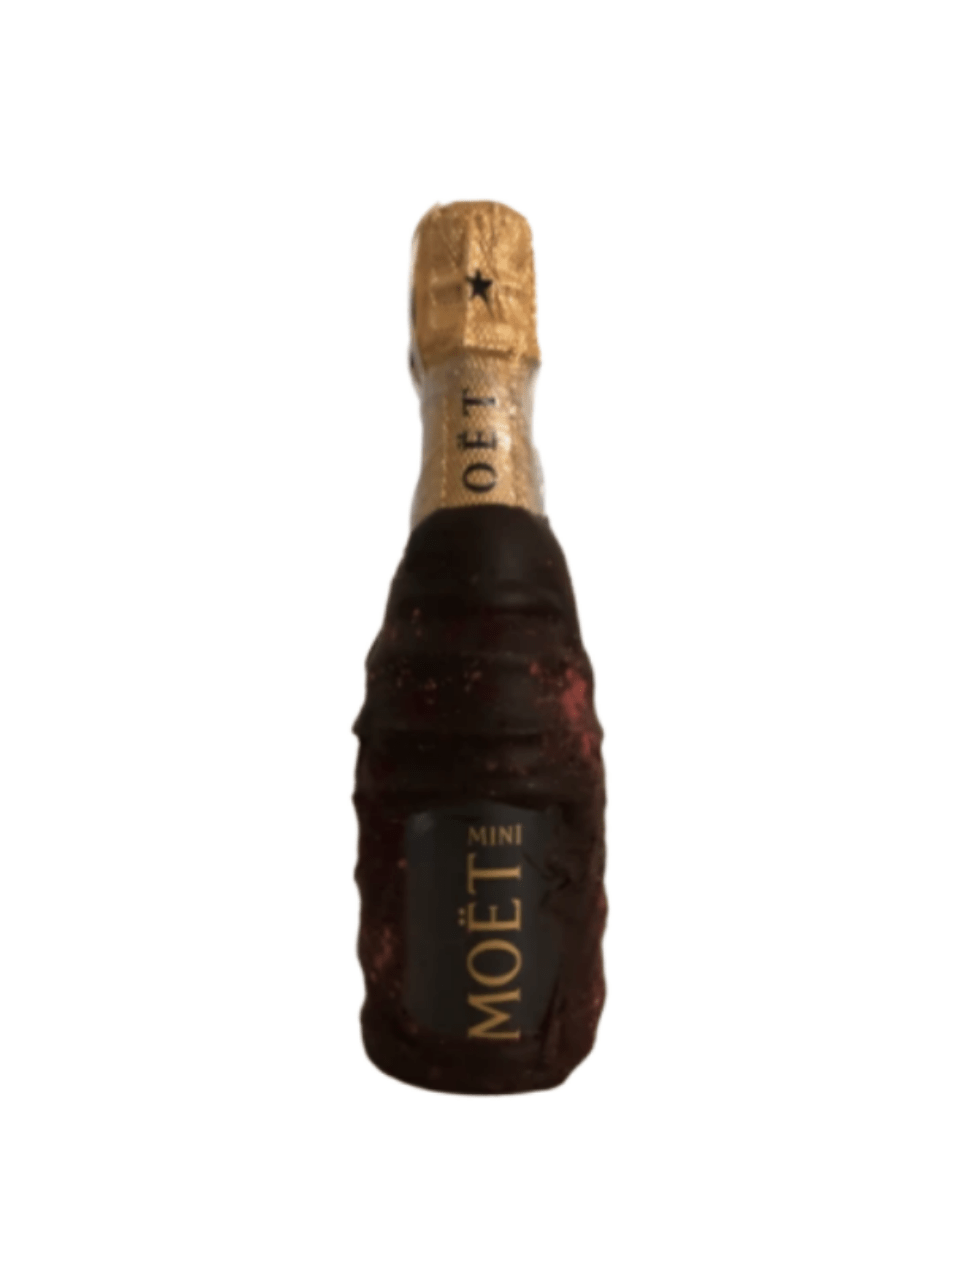 Moet & Chandon Champagne Ice Imperial - Wine To Ship Online Store